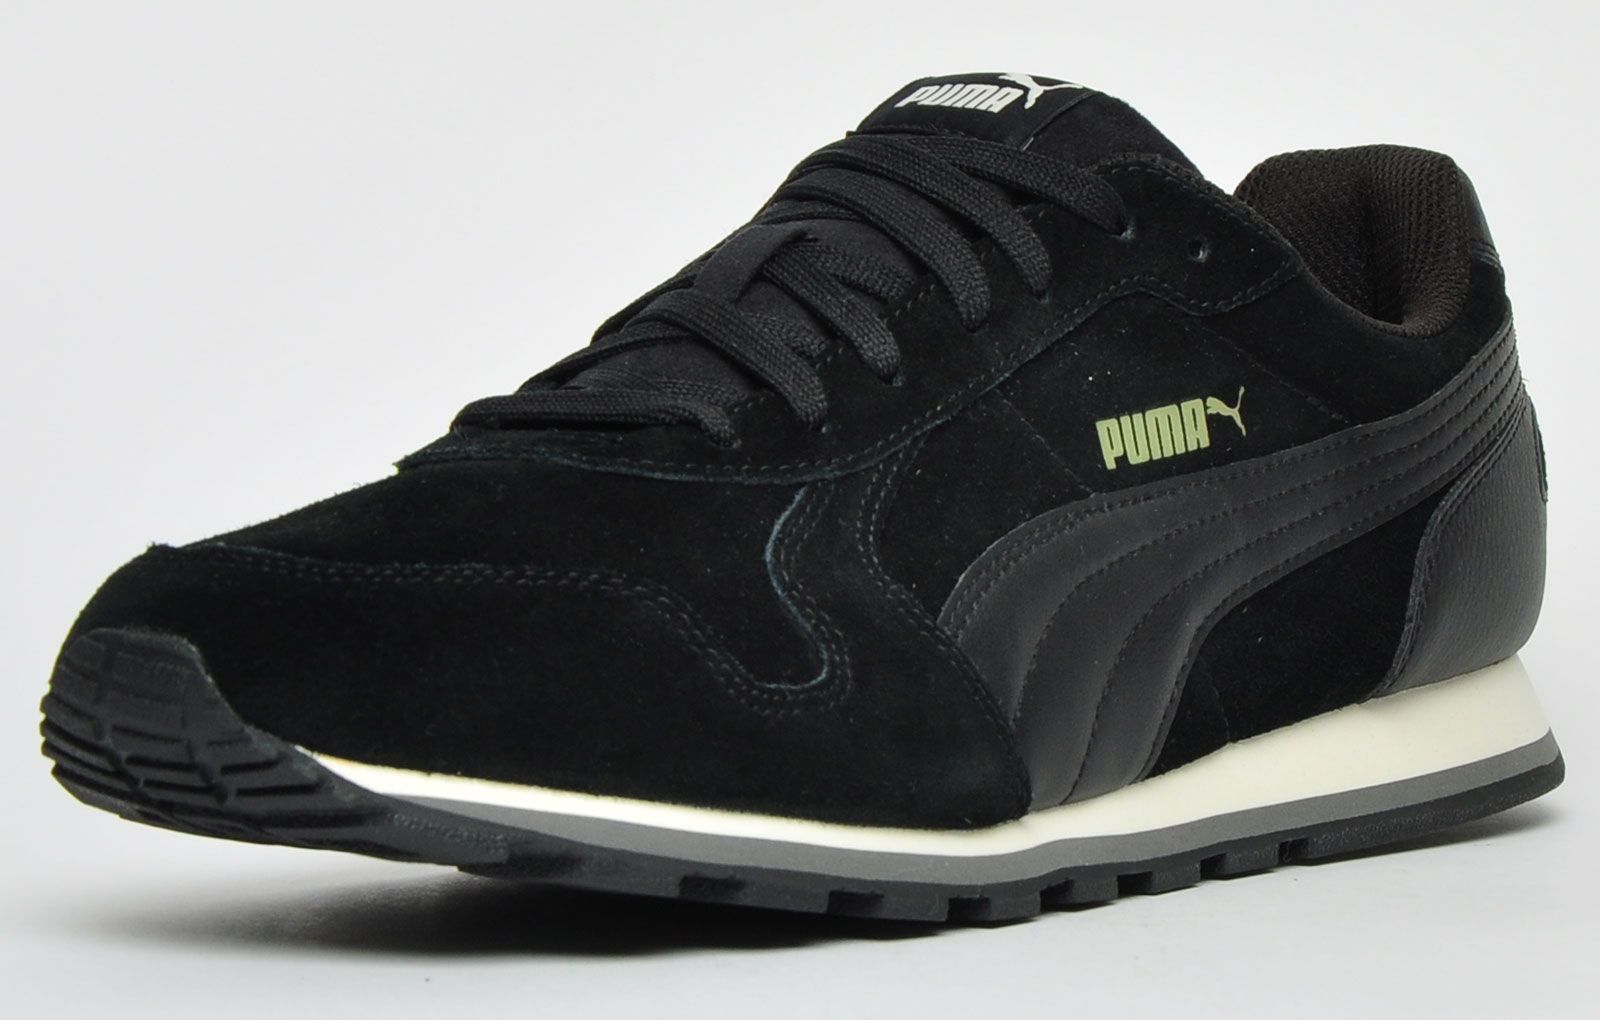 <p>Inspired by a legendary running shoe, the Puma ST Runner comes with a mix of athletic and lifestyle features.</p> <p>Crafted from a quality suede leather upper utilizing a stabilizing heel clip that enhances the shoe’s overall support and a carbon rubber outsole with a deeper tread pattern for excellent traction, high wear durability and perfect grip.</p> <p>Puma ST runner trainers are the perfect finishing touch to any casual footwear wardrobe and feature all the attributes you’d expect from a true modern day classic.</p> <p>- Suede leather upper</p> <p>- Padded and shaped heel collar</p> <p>- Cushioned insole</p> <p>- Durable Carbon Rubber outsole</p> <p>- Stabilizing heel support</p> <p>- Puma branding throughout</p>